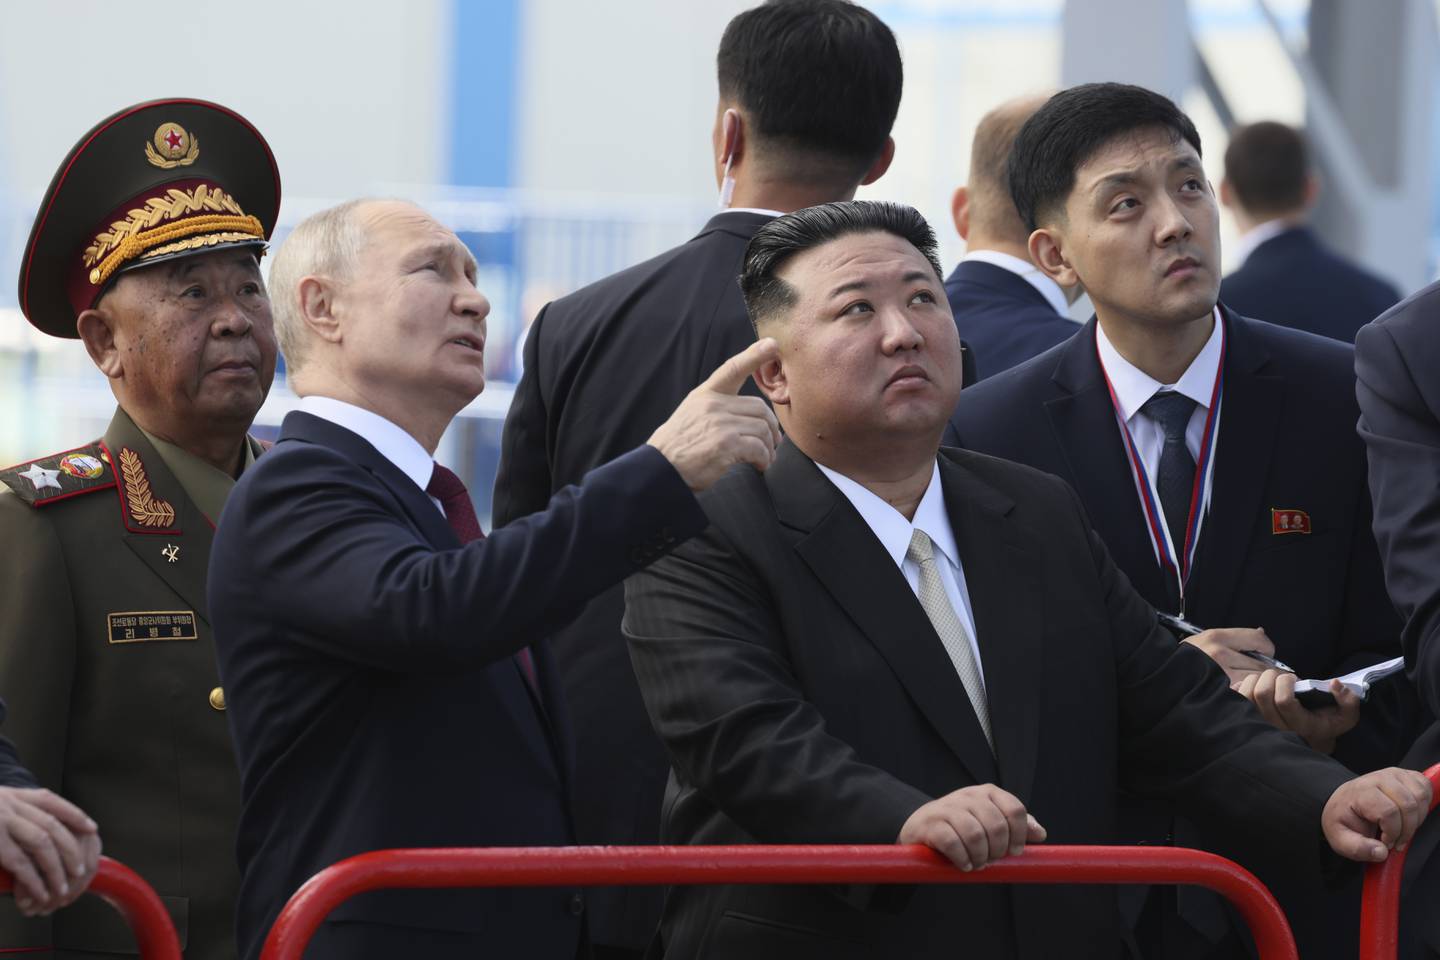 Russian President Vladimir Putin and North Korea's leader Kim Jong Un examine a launch pad during their meeting at the Vostochny cosmodrome outside the city of Tsiolkovsky, about 200 kilometers (125 miles) from the city of Blagoveshchensk in the far eastern Amur region, Russia, on Wednesday, Sept. 13, 2023. (Mikhail Metzel, Sputnik, Kremlin Pool Photo via AP)